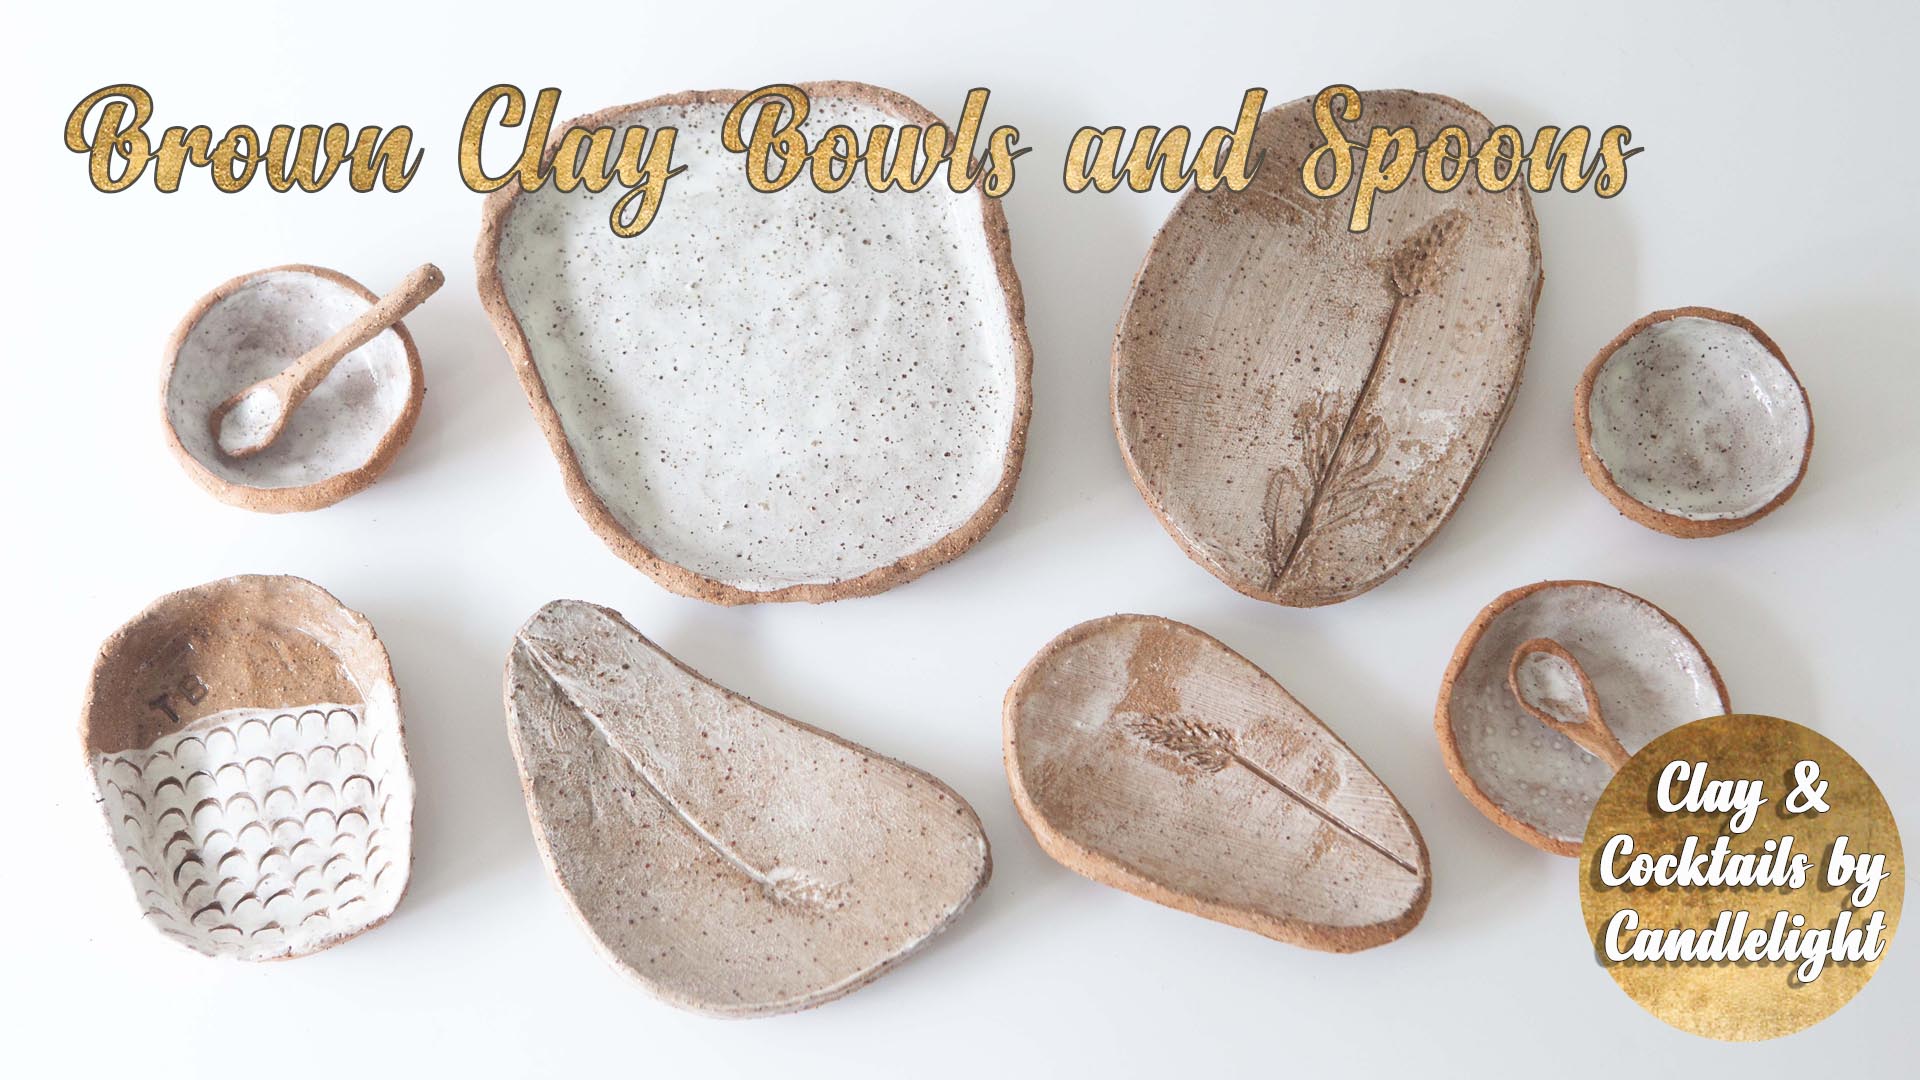 BrownclayBowlsspoons